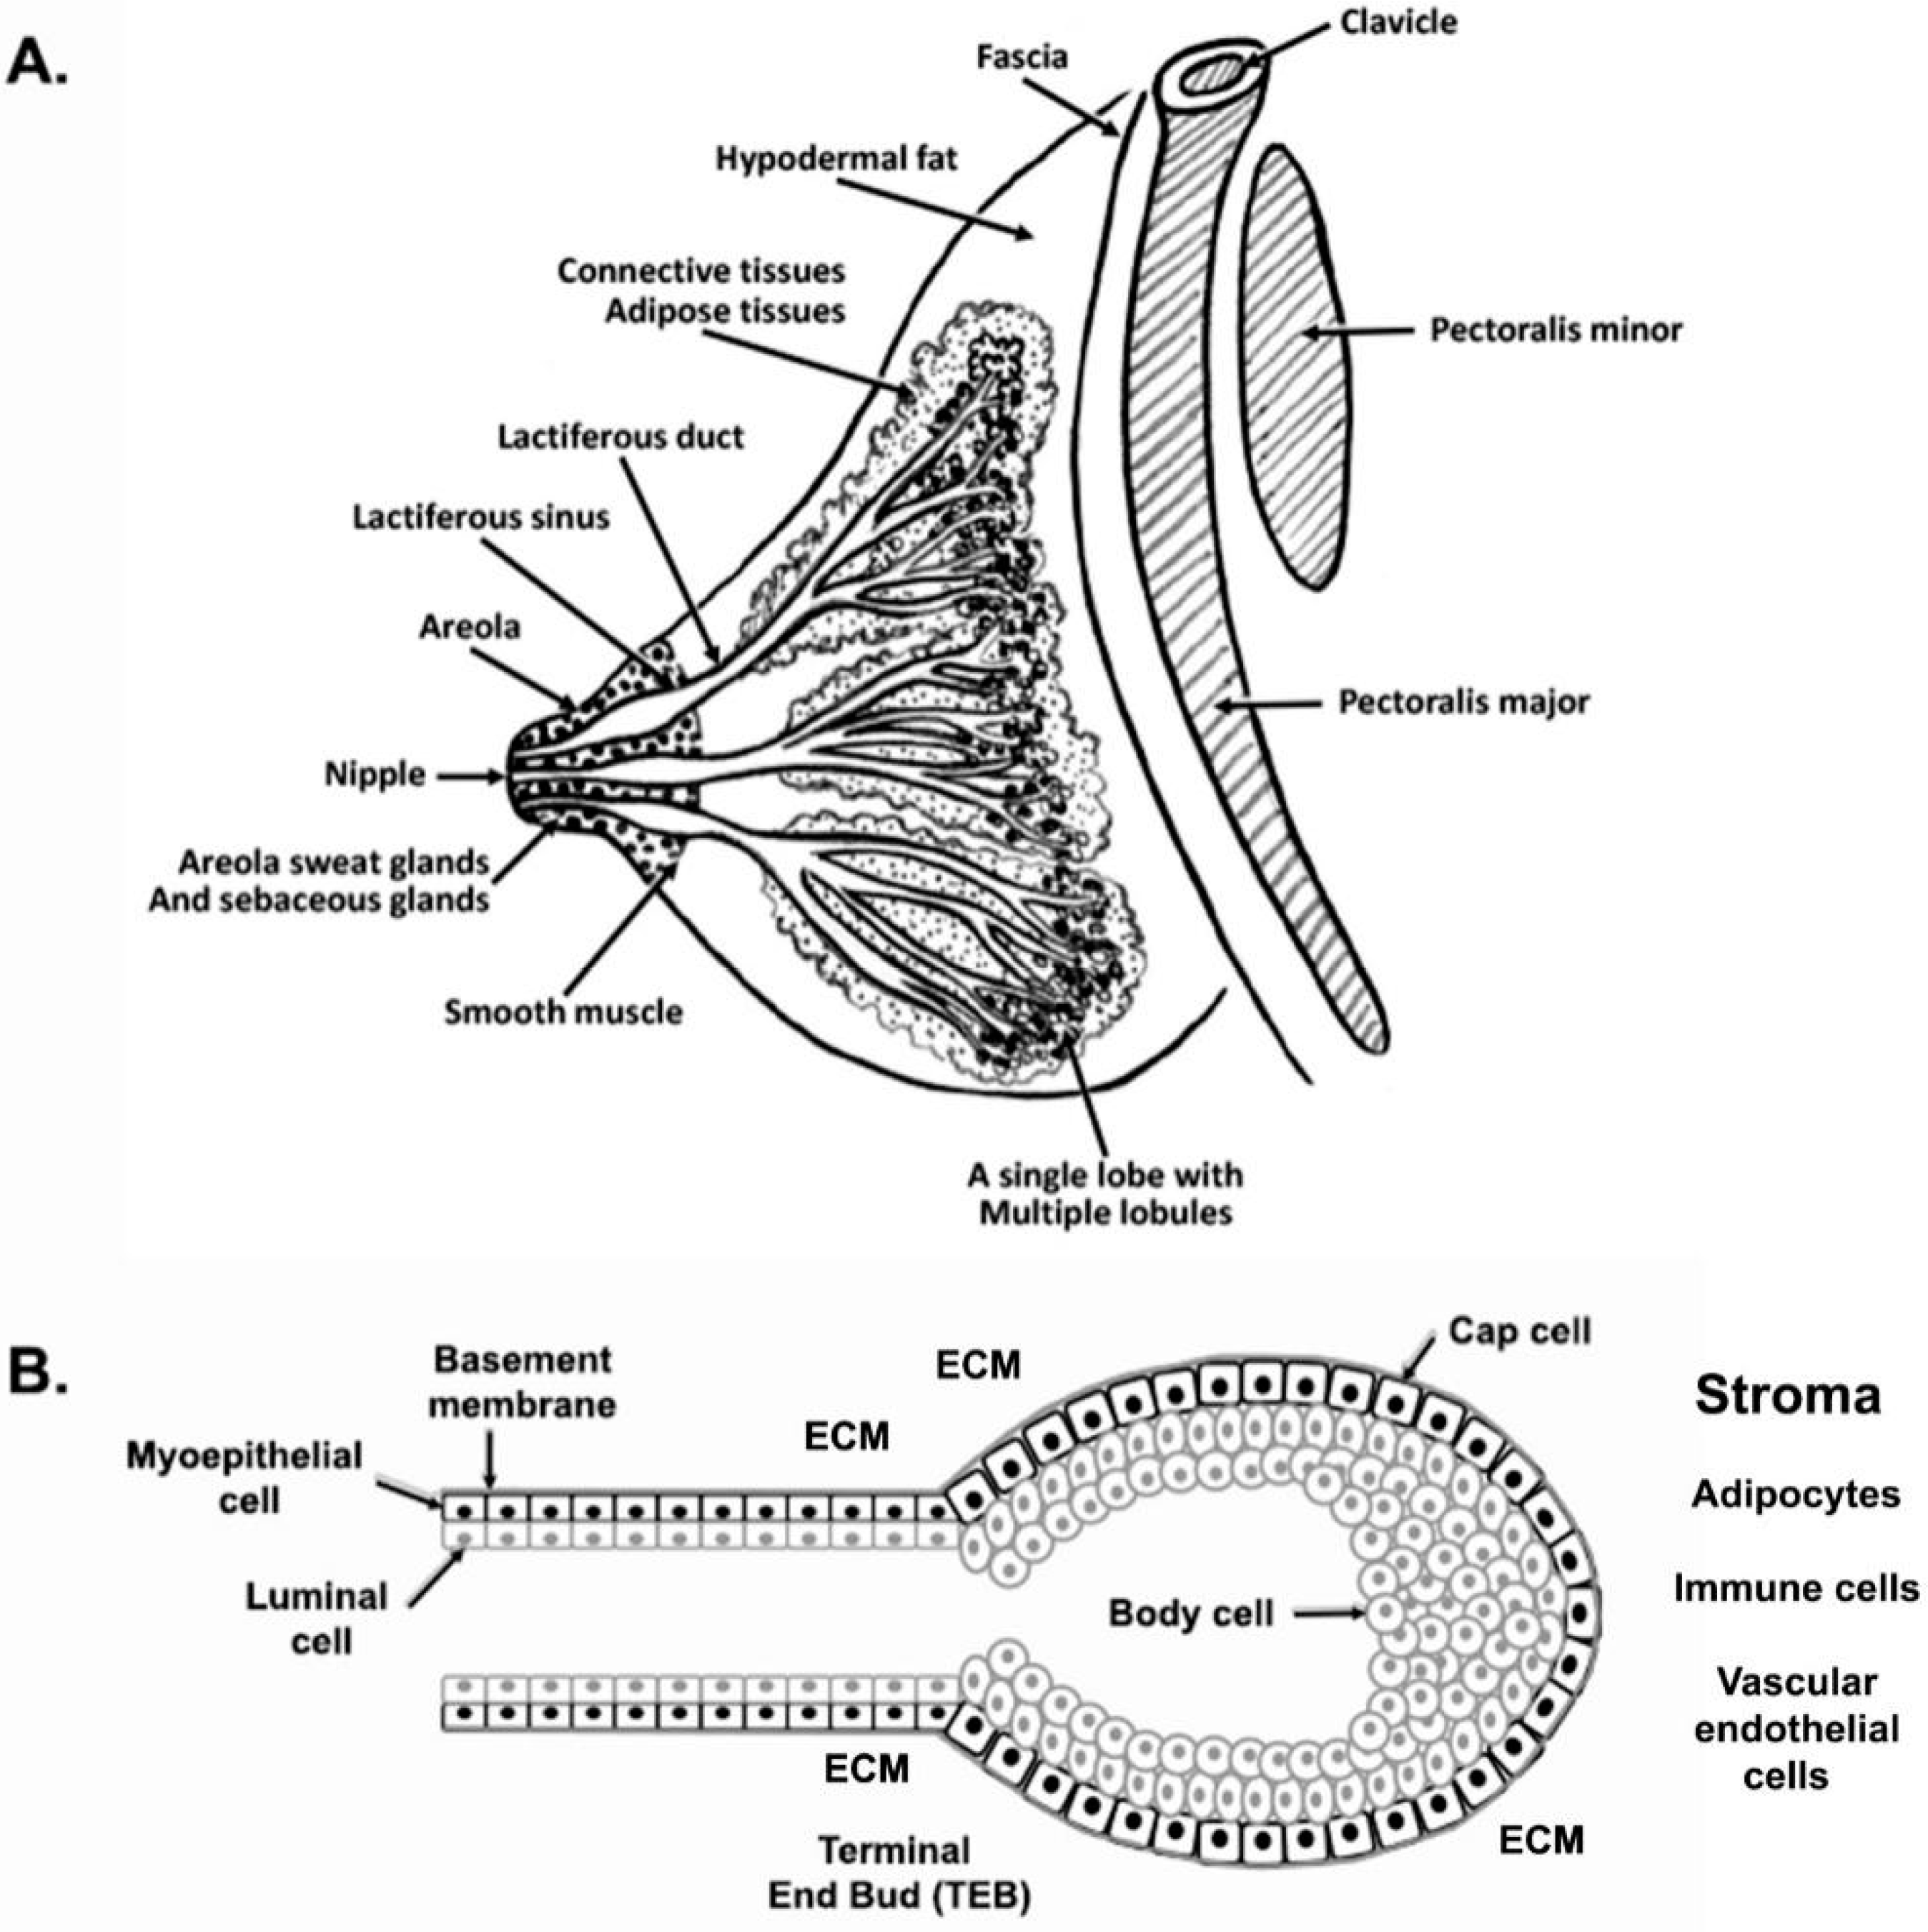 IJMS | Free Full-Text | The Mammary Gland: Basic Structure and 